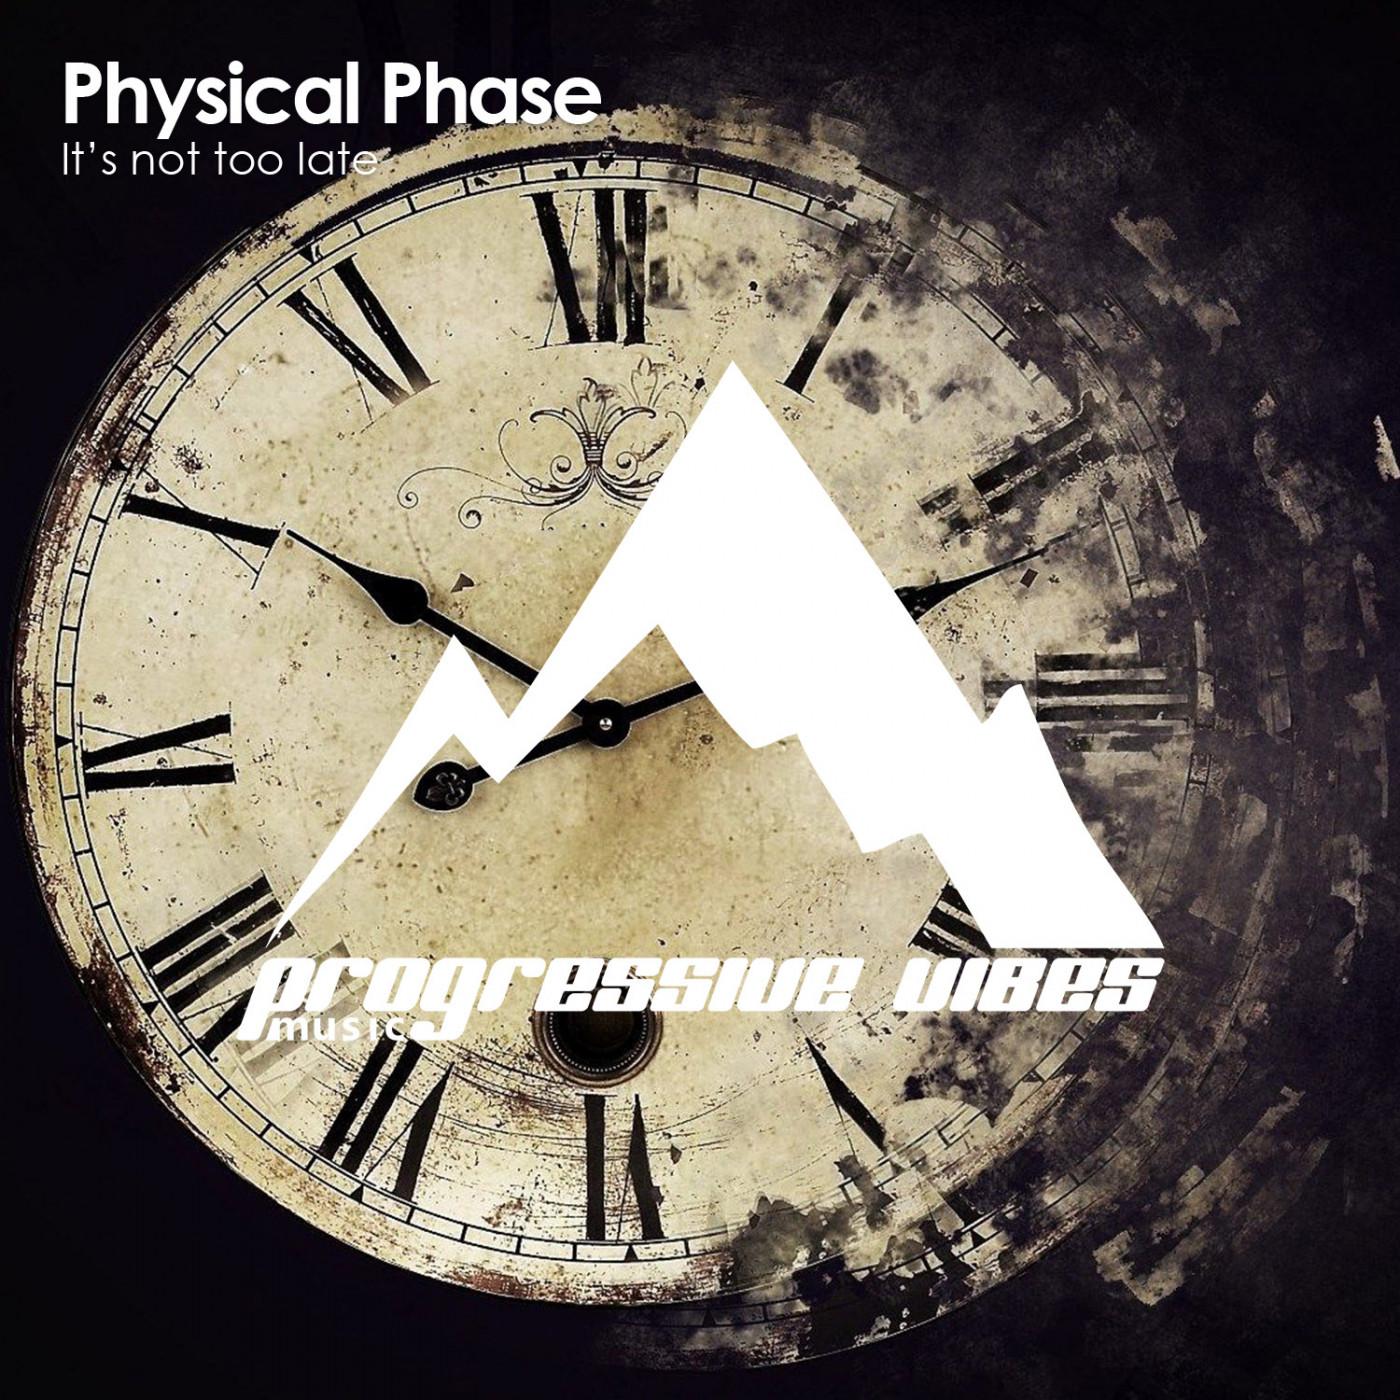 Physical Phase - It's not too late (Original Mix)